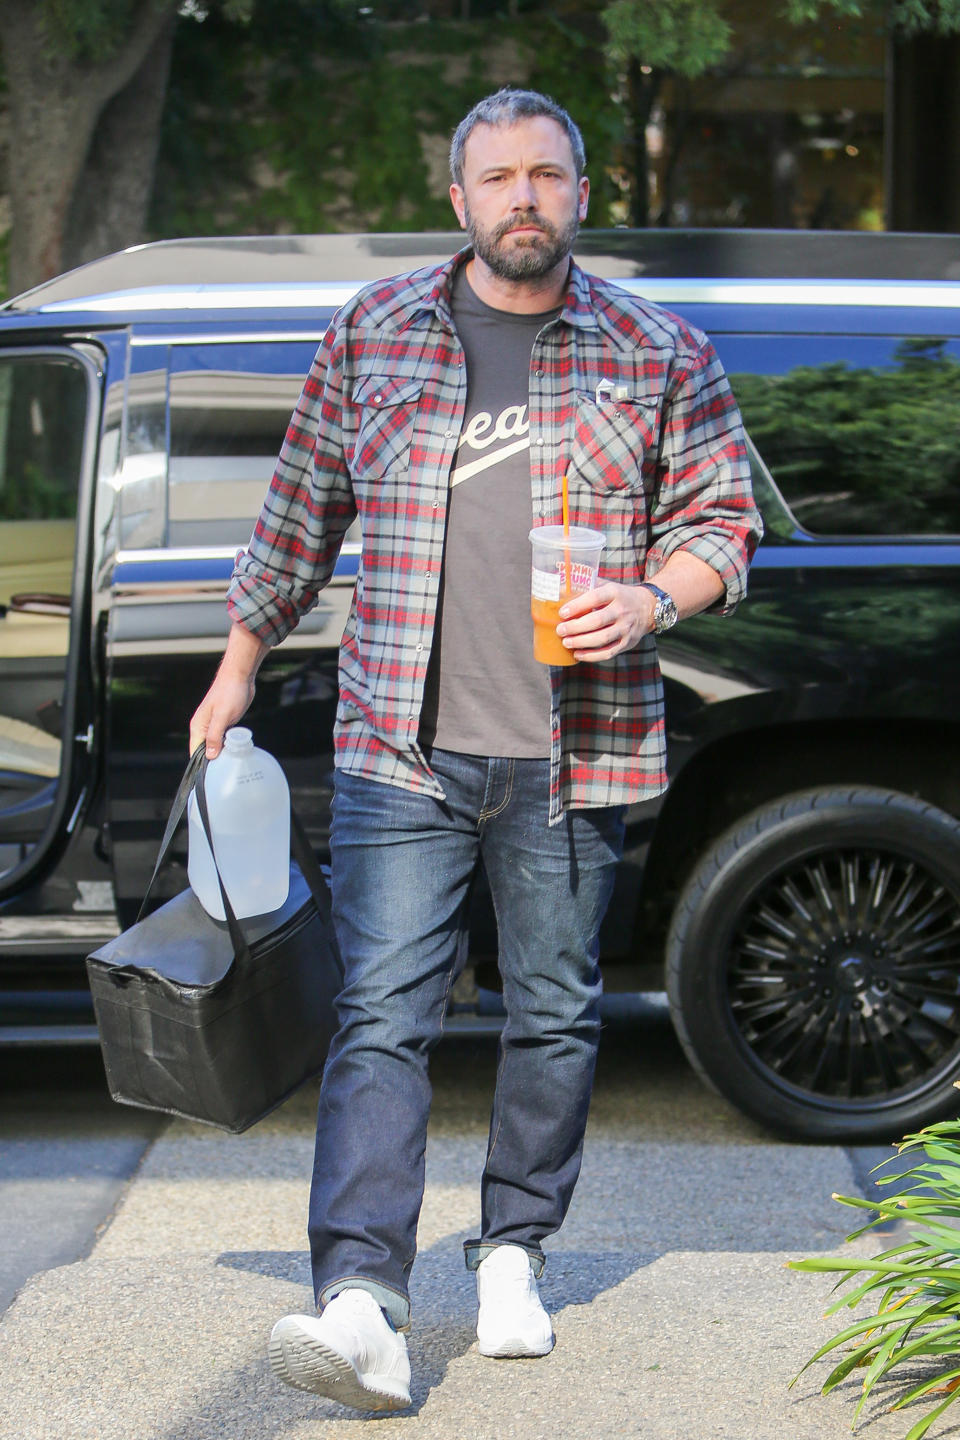 Man in a plaid shirt over a graphic tee, denim, and sneakers, carrying a beverage and a bag, exiting a vehicle